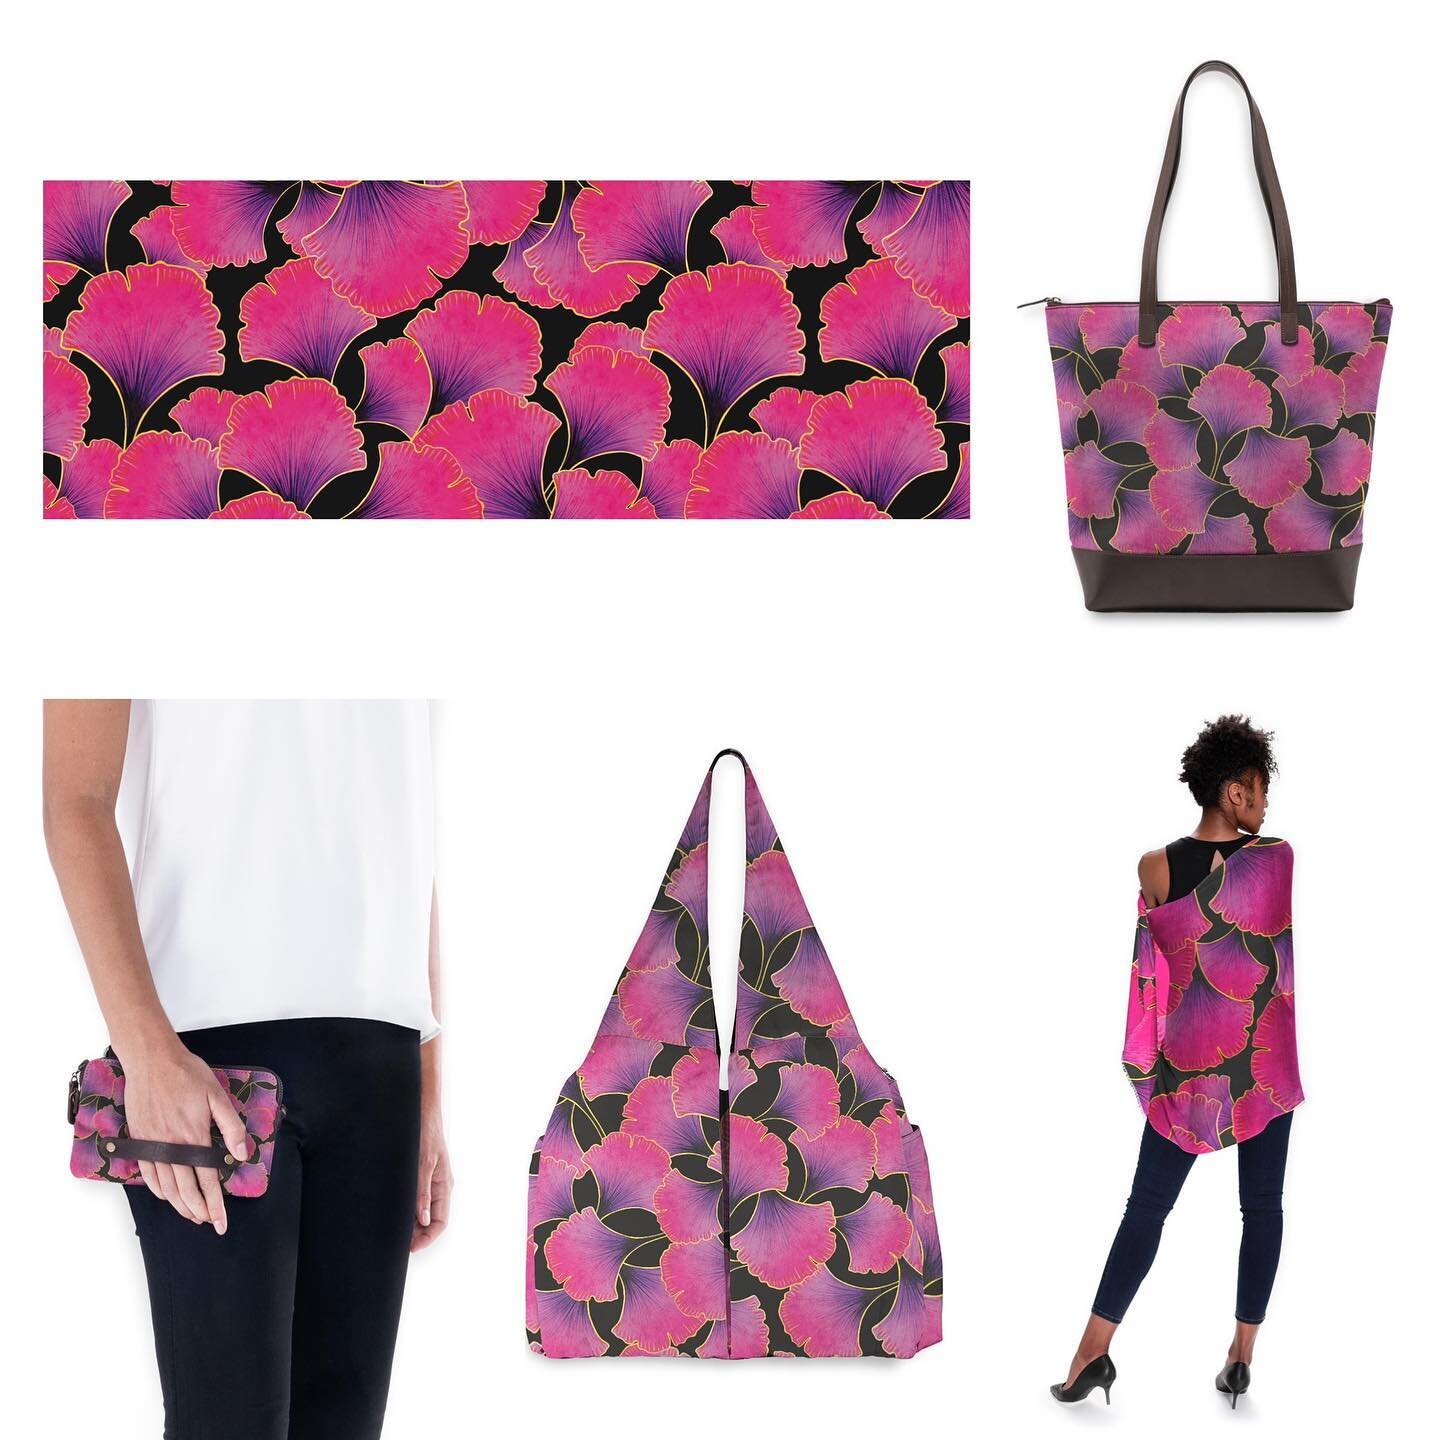 Art scarf: Beauty

Did you know that you can get matching bags or a clutch to go with this gorgeous ginkgo scarf? 😍

Just click on the &rdquo;bags&rdquo; tab once are on the VIDA website and you will see the beautiful clutches and bags you can choos